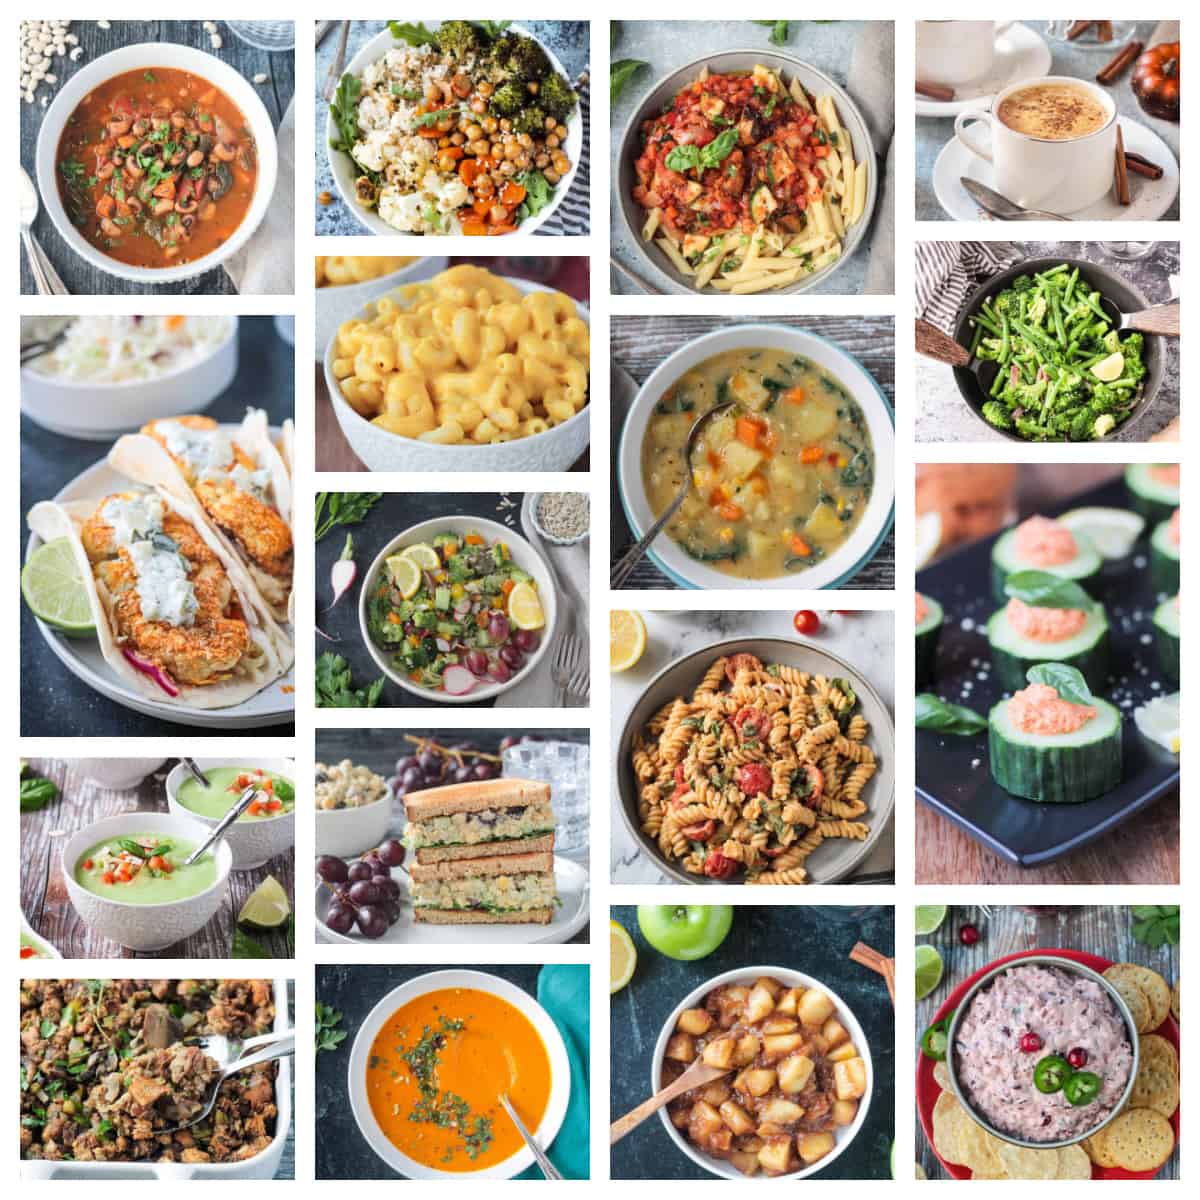 17 photo collage of best recipes of 2023.